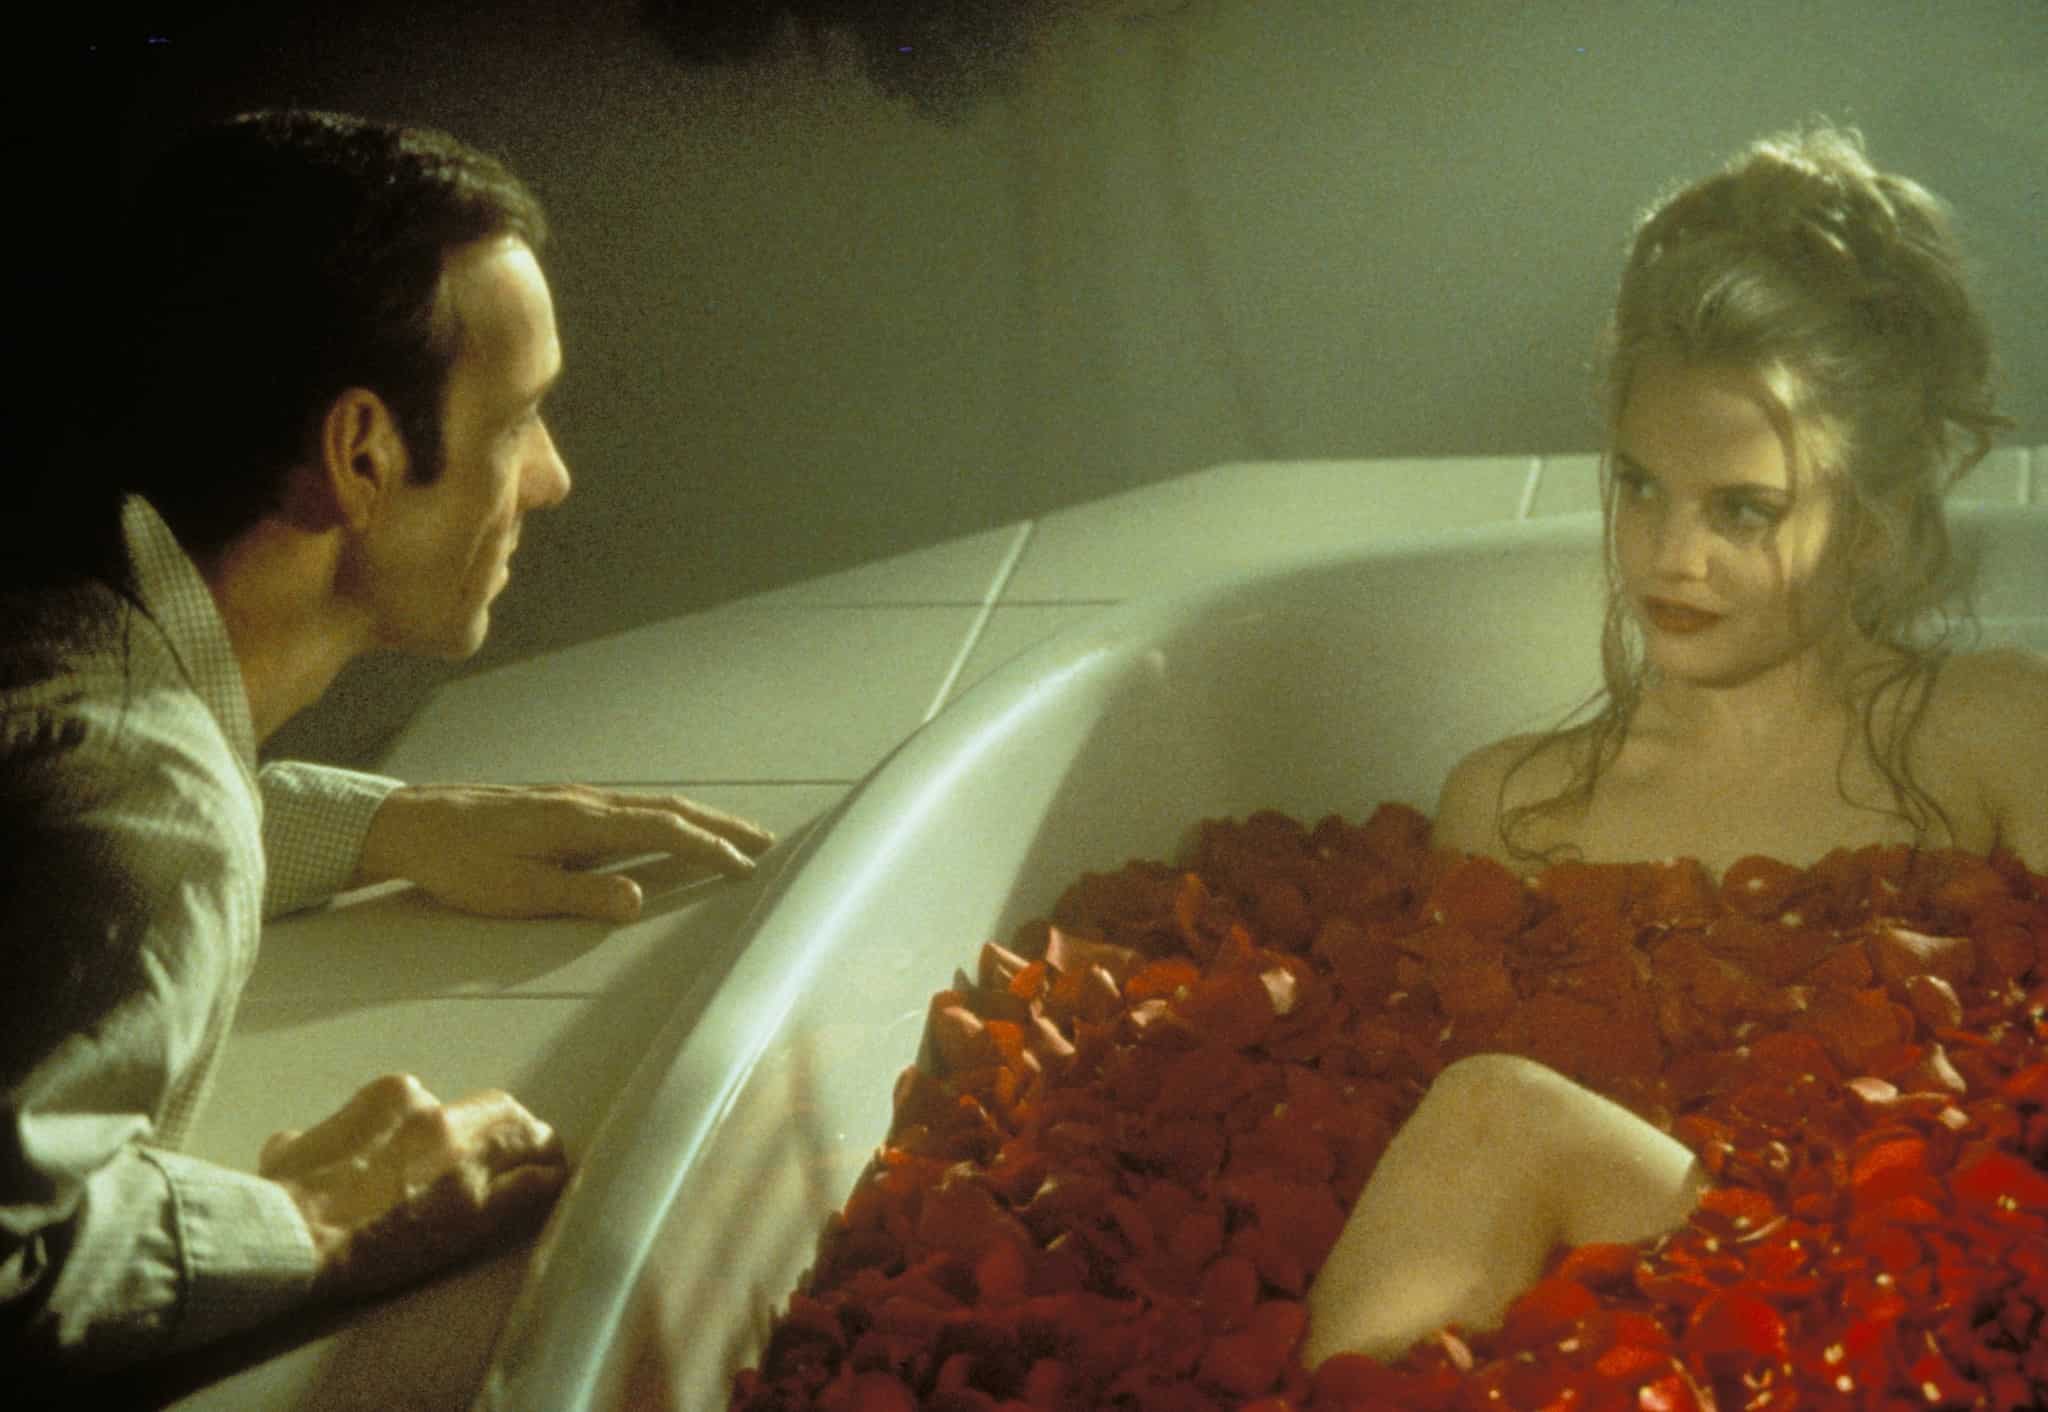 A man talks to a girl in a rose-filled tub in this photo from Dreamworks Pictures.